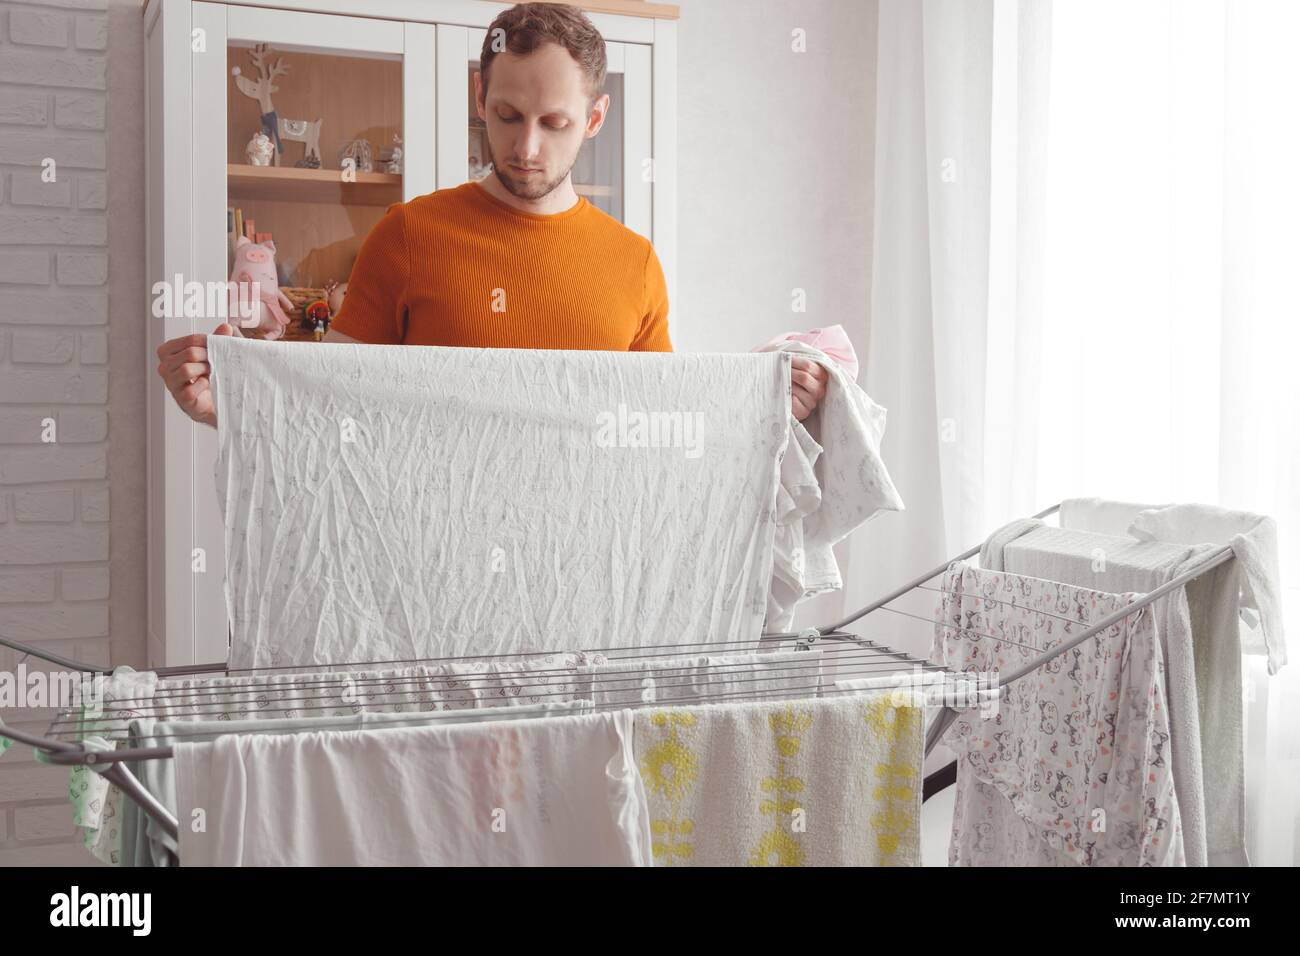 https://c8.alamy.com/comp/2F7MT1Y/man-doing-home-chores-caucasian-man-removes-clothing-and-baby-sheets-after-laundry-from-portable-dryer-in-living-room-2F7MT1Y.jpg